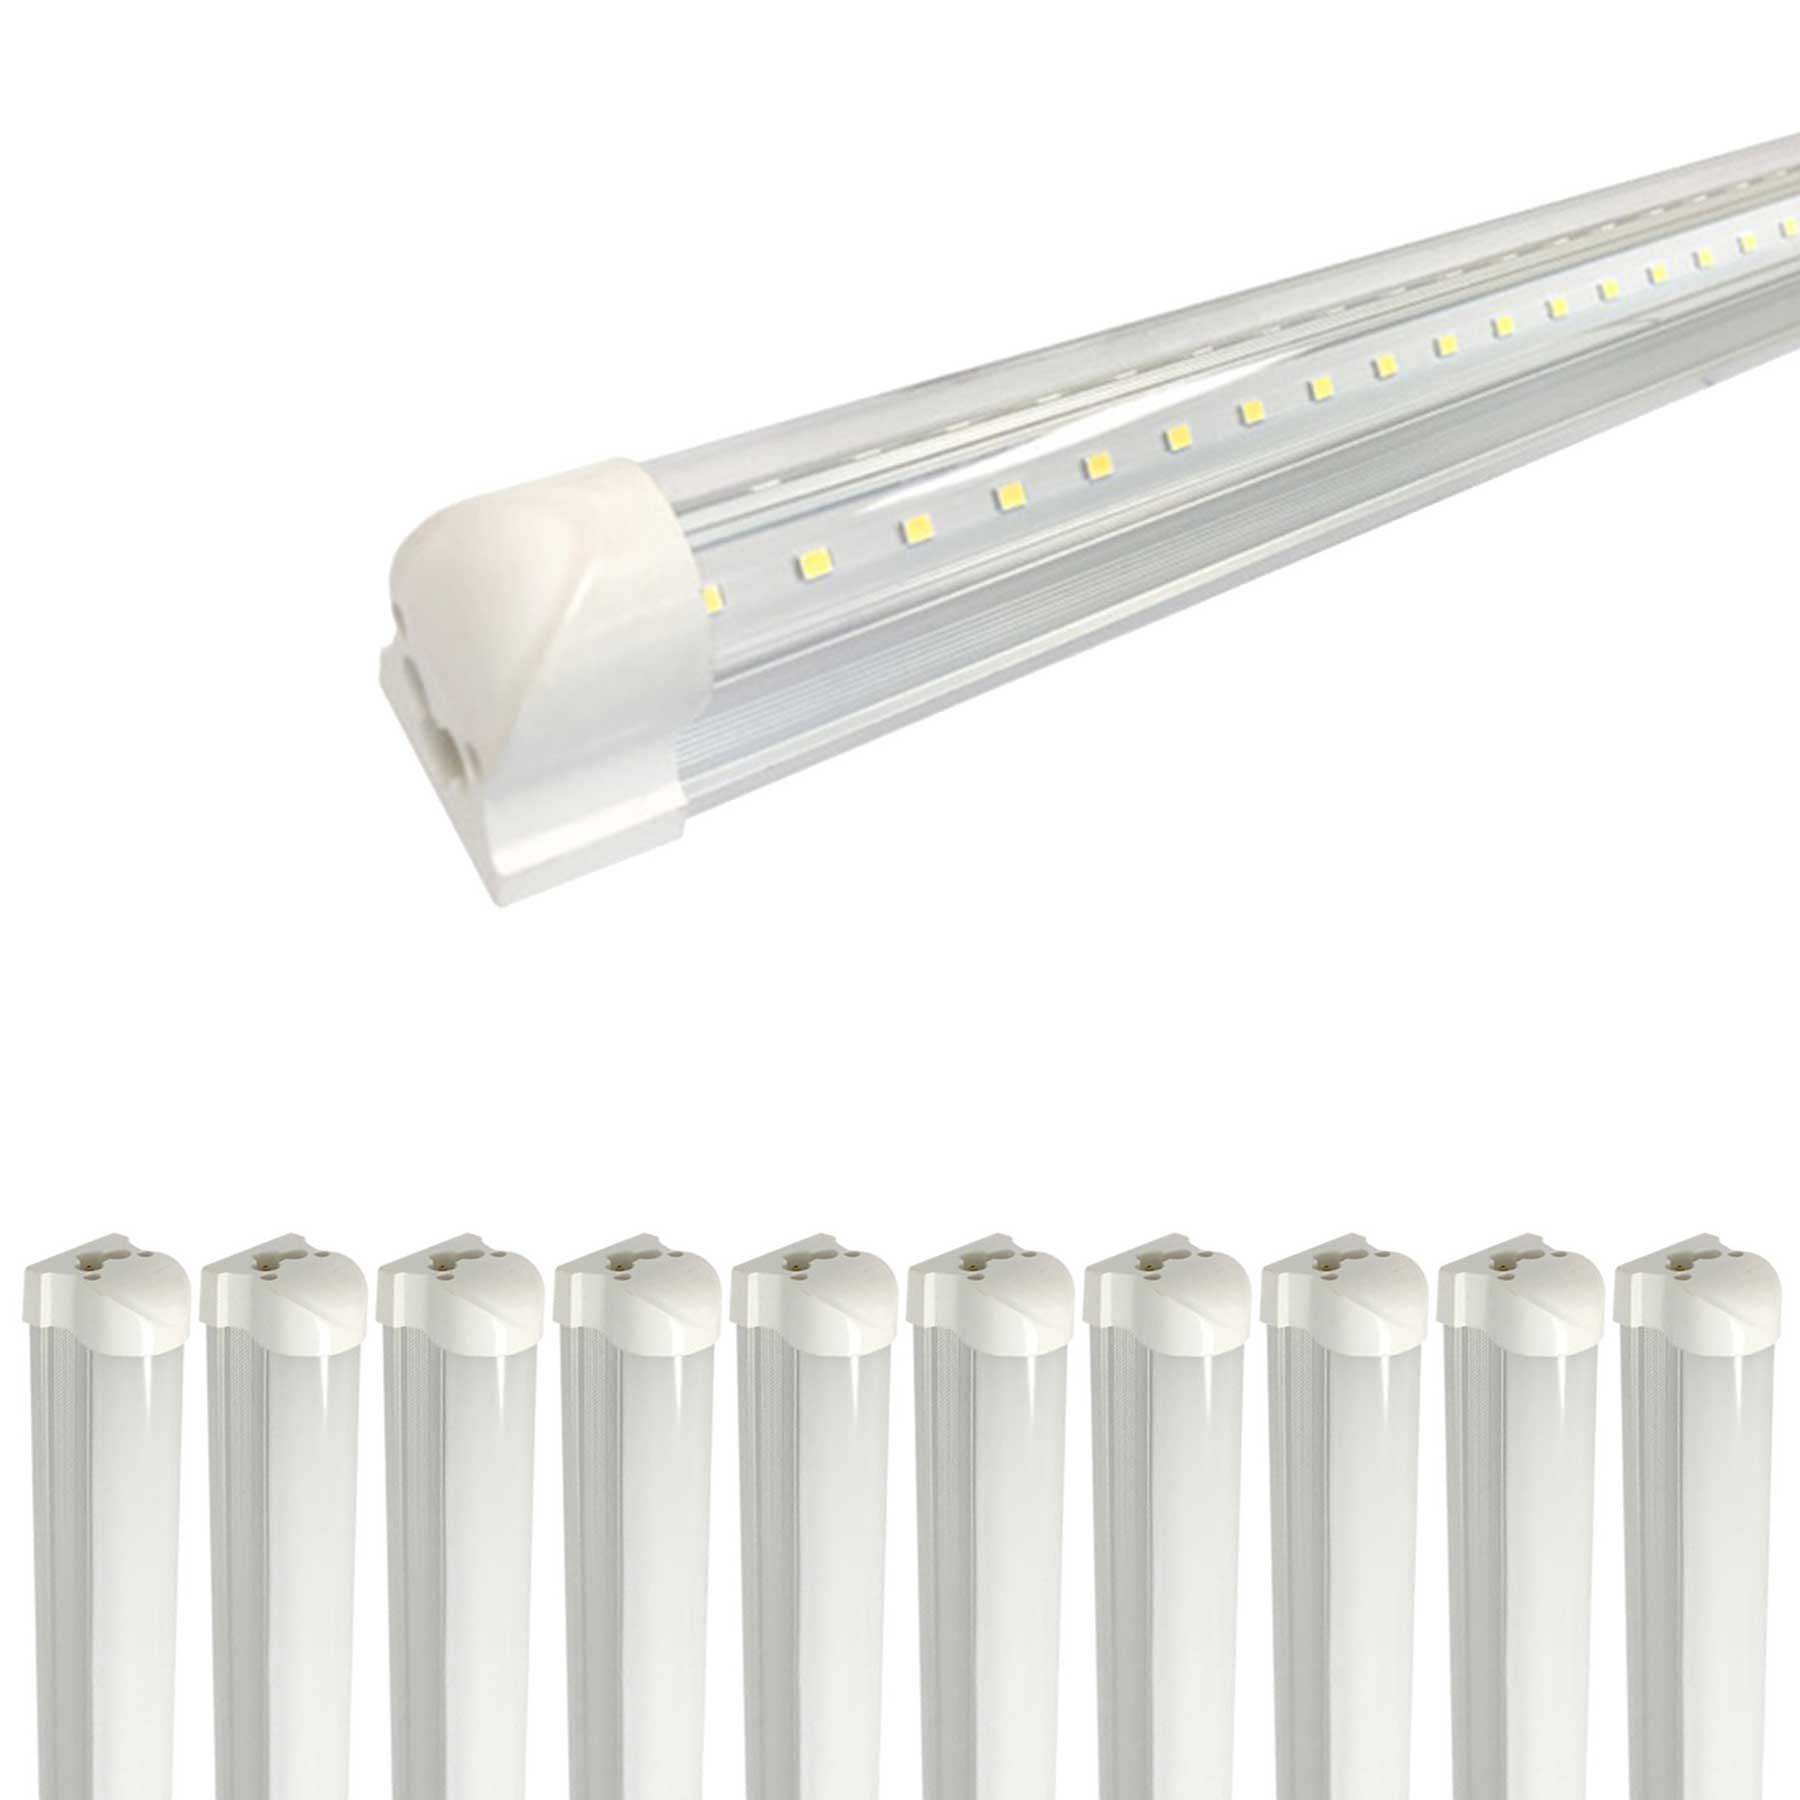 60-Watt T8 8-Foot 8670 lumens Frosted Integrated LED Light Tubes